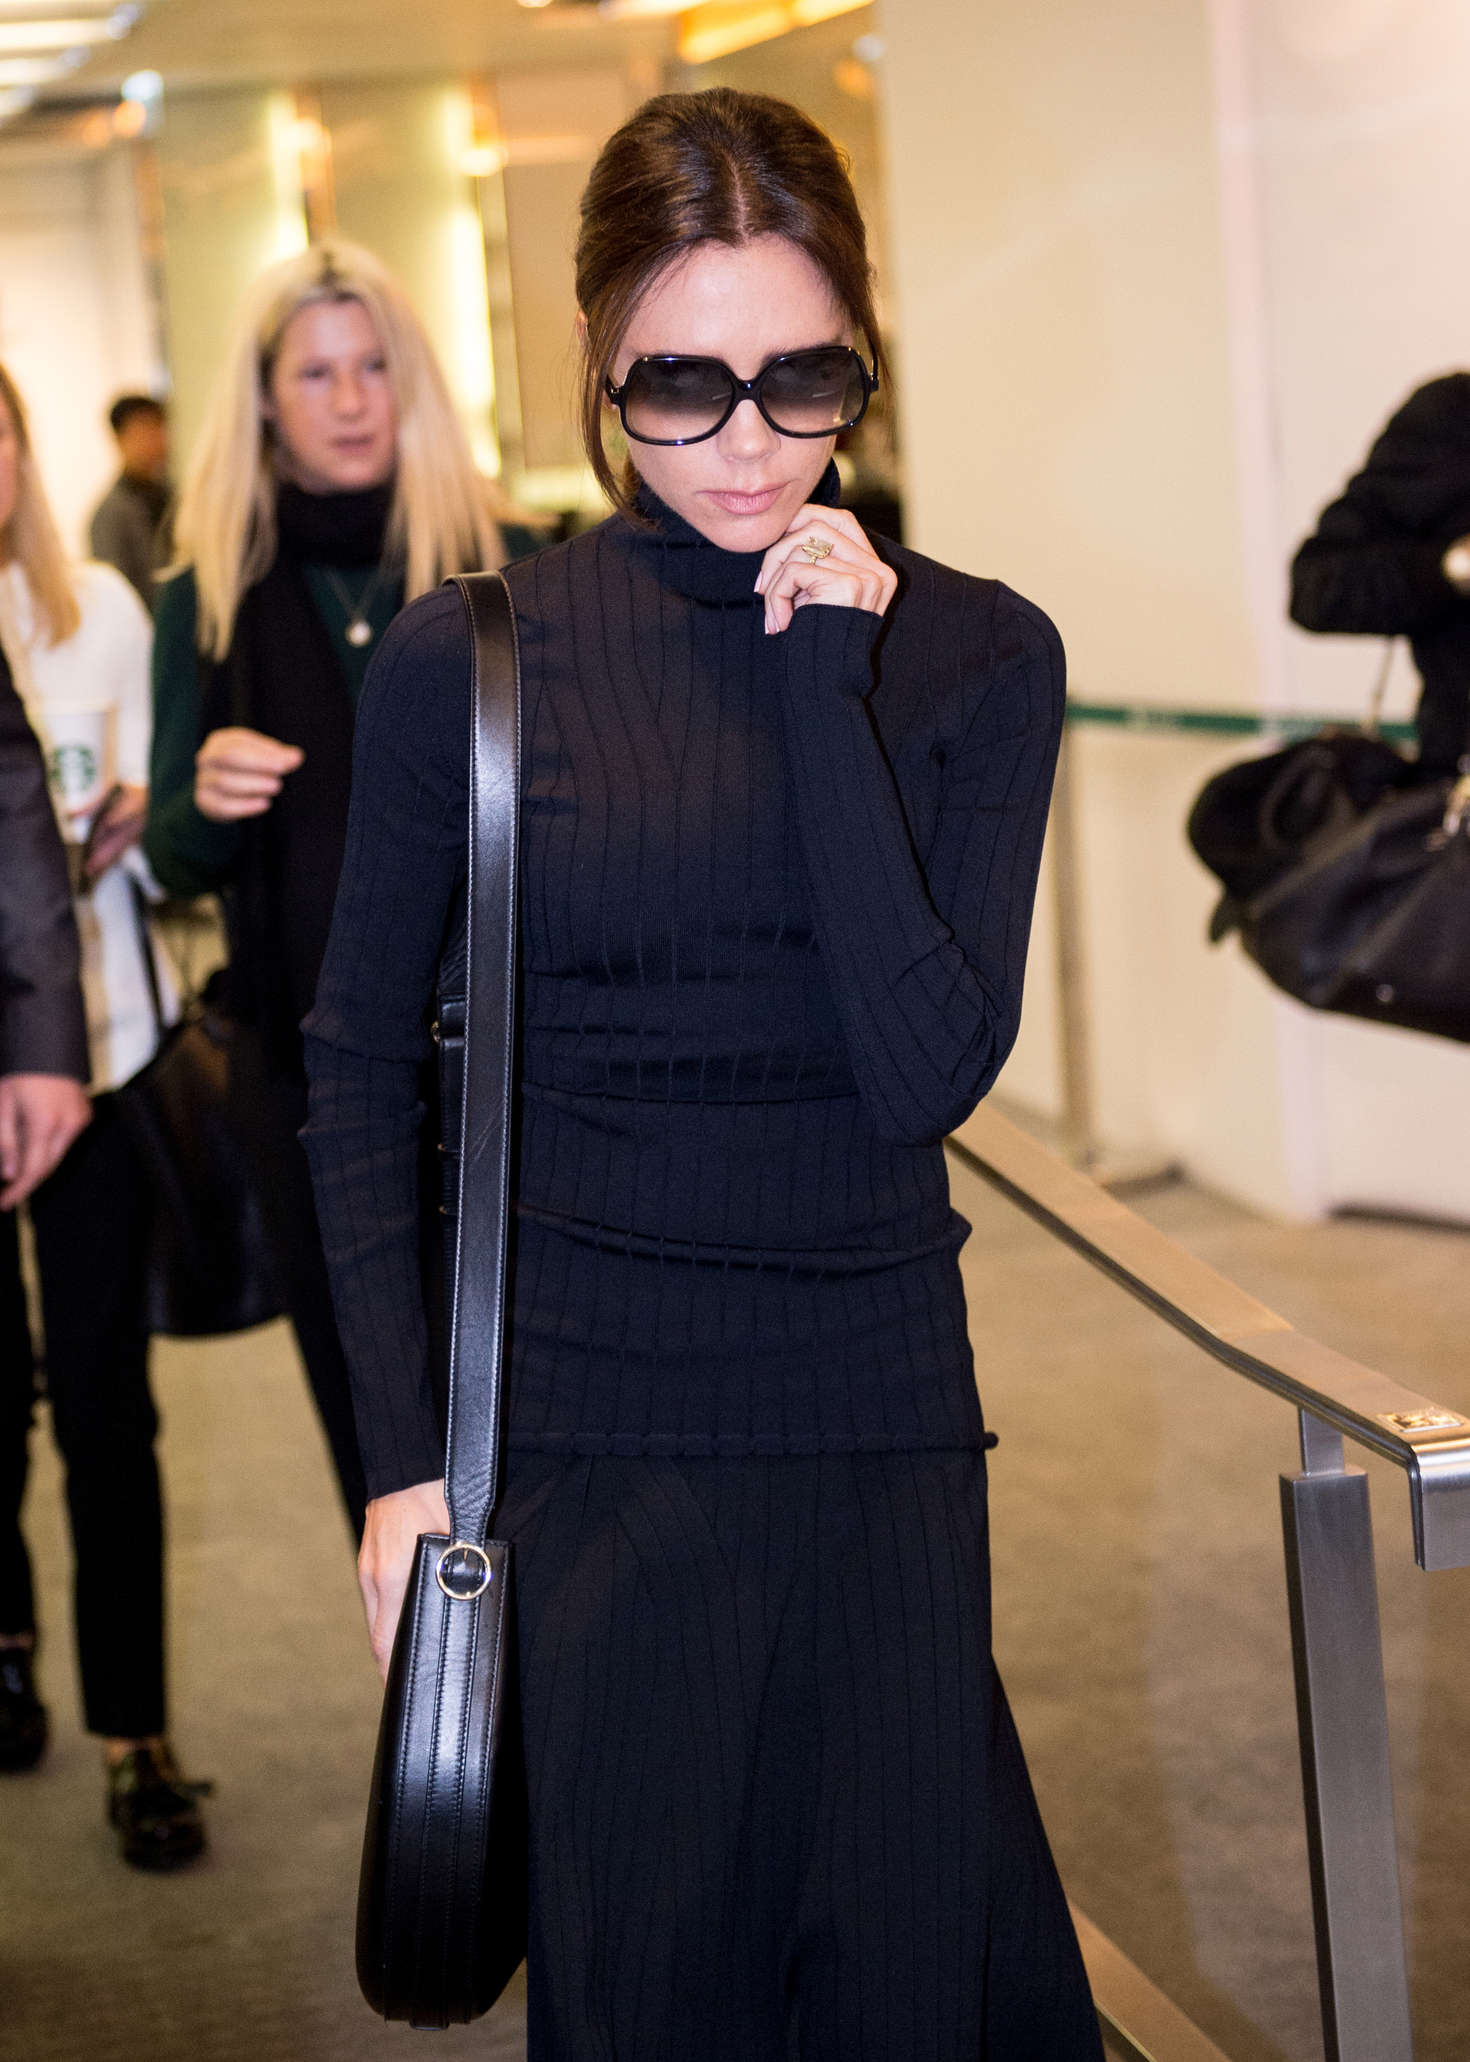 Victoria Beckham - Attends the Victoria Beckham Store Opening in China